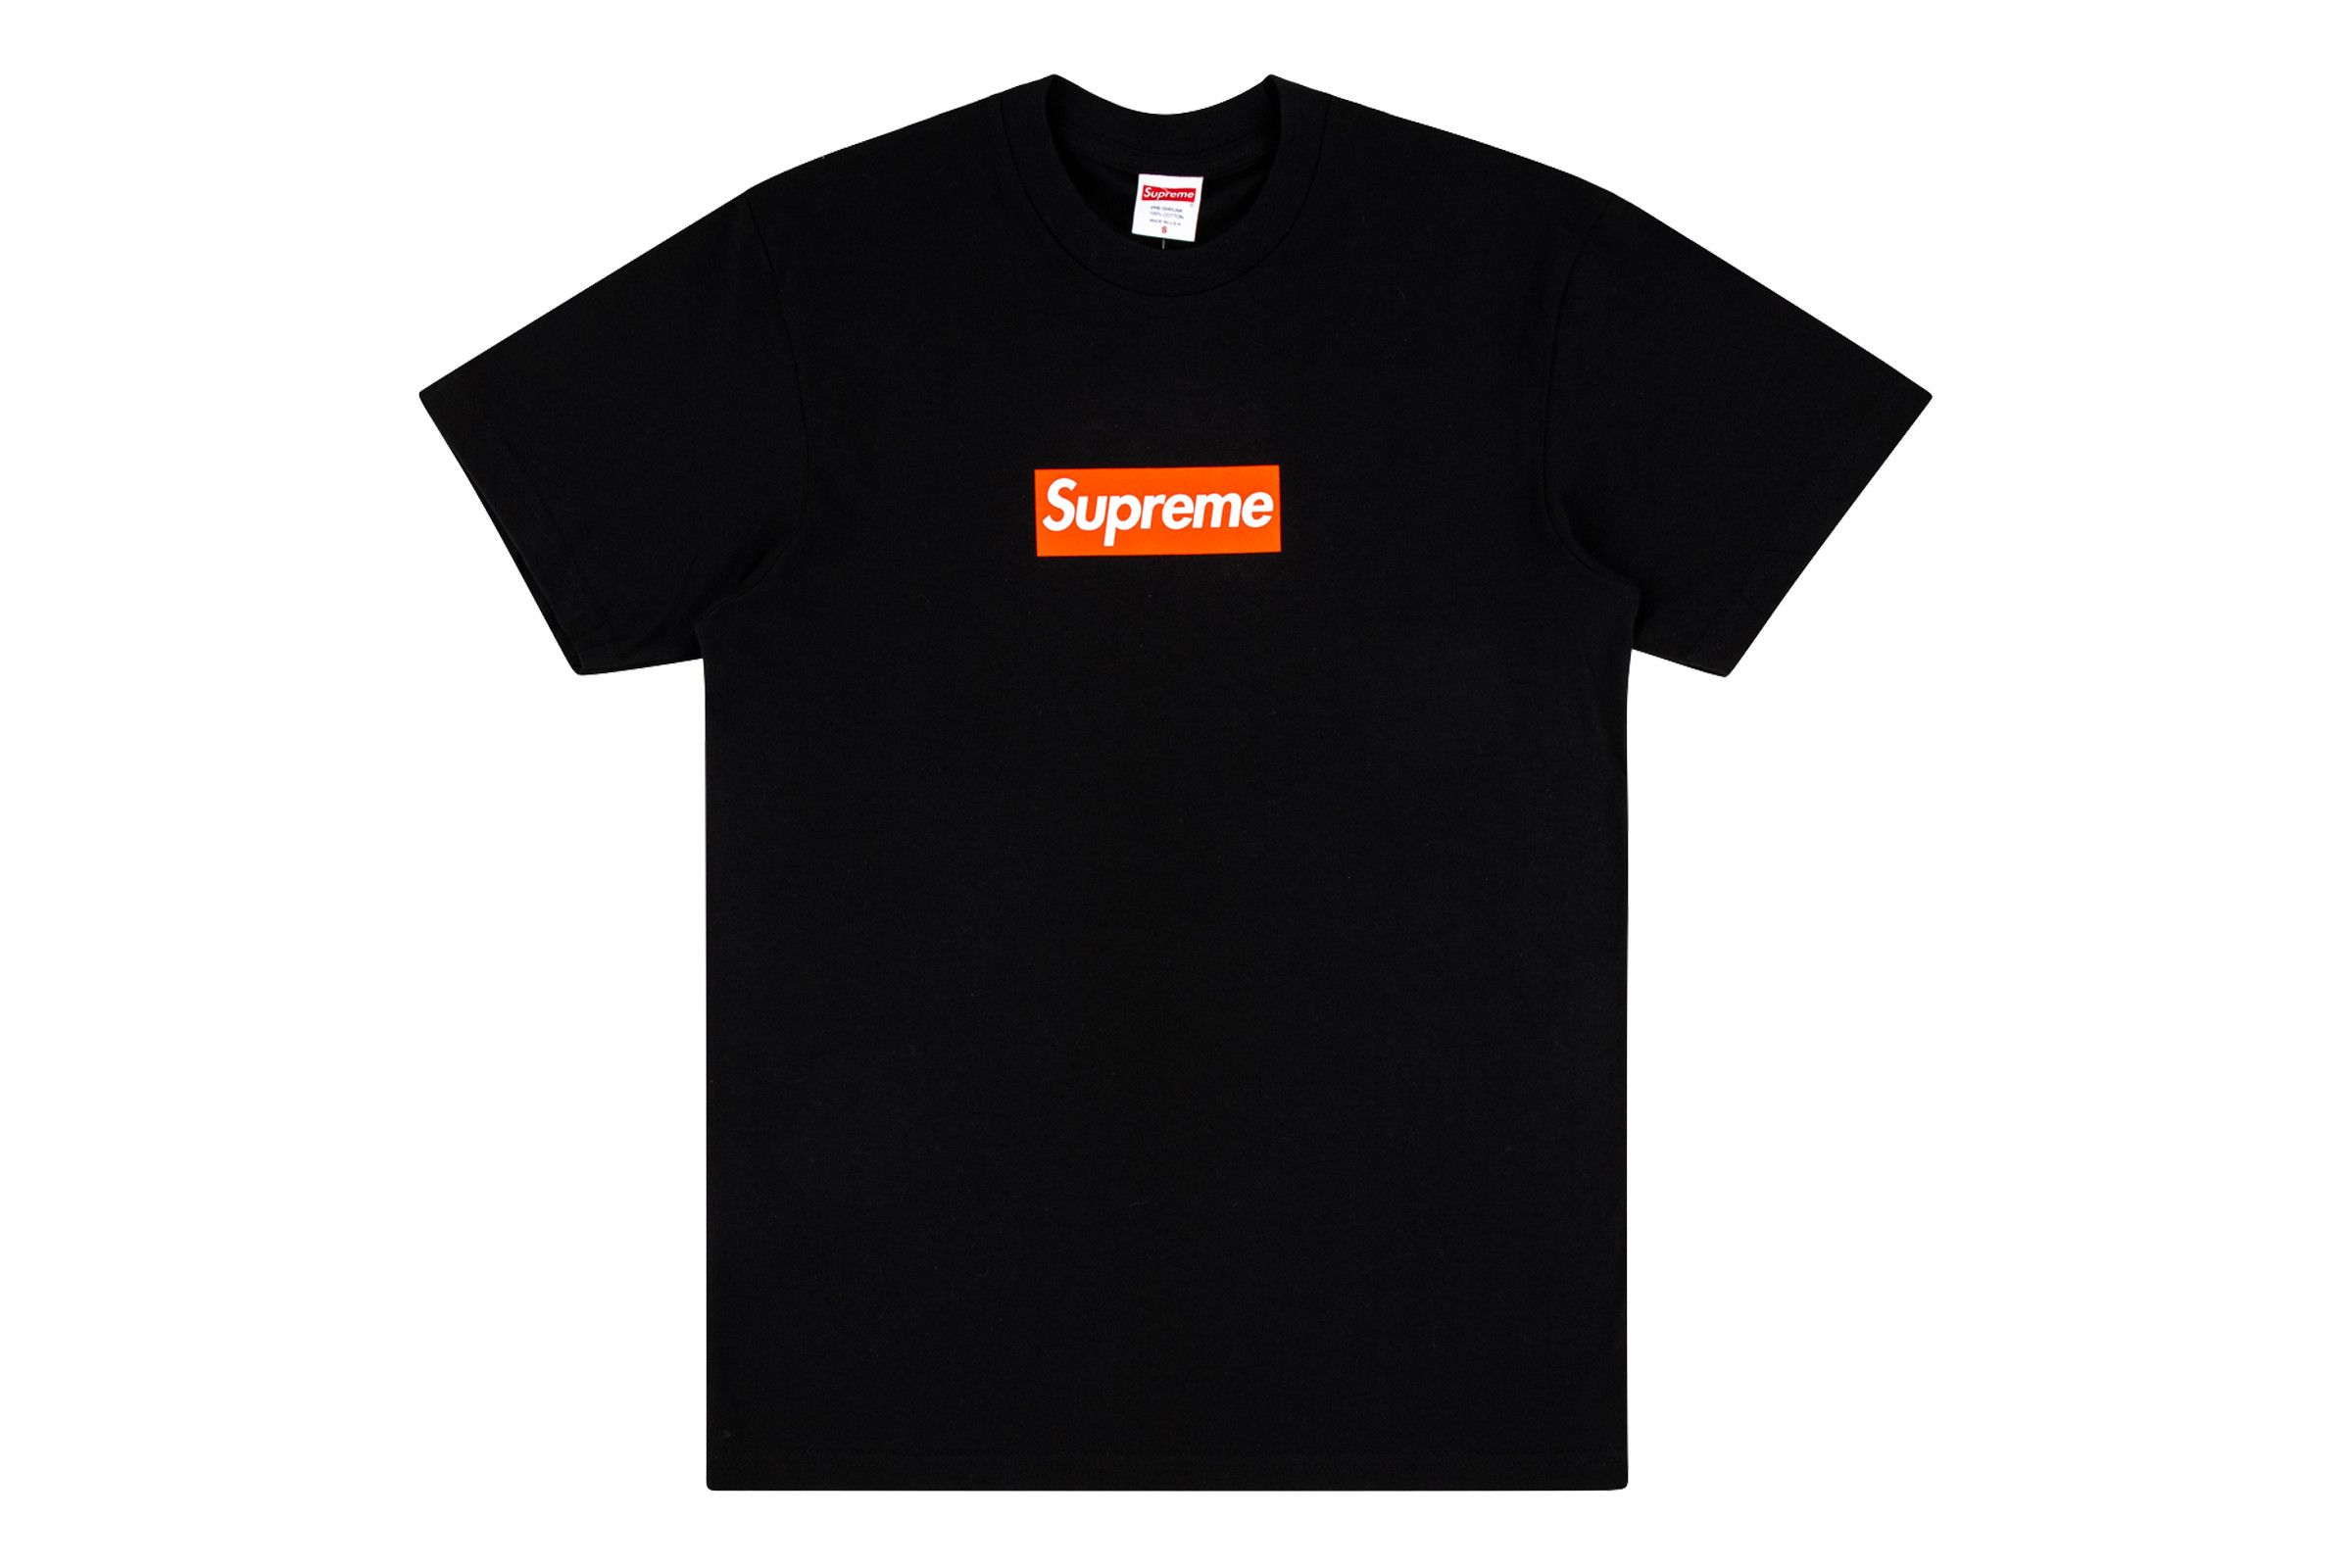 Supreme Set To Release New Box Logo Tee For COVID-19 Relief